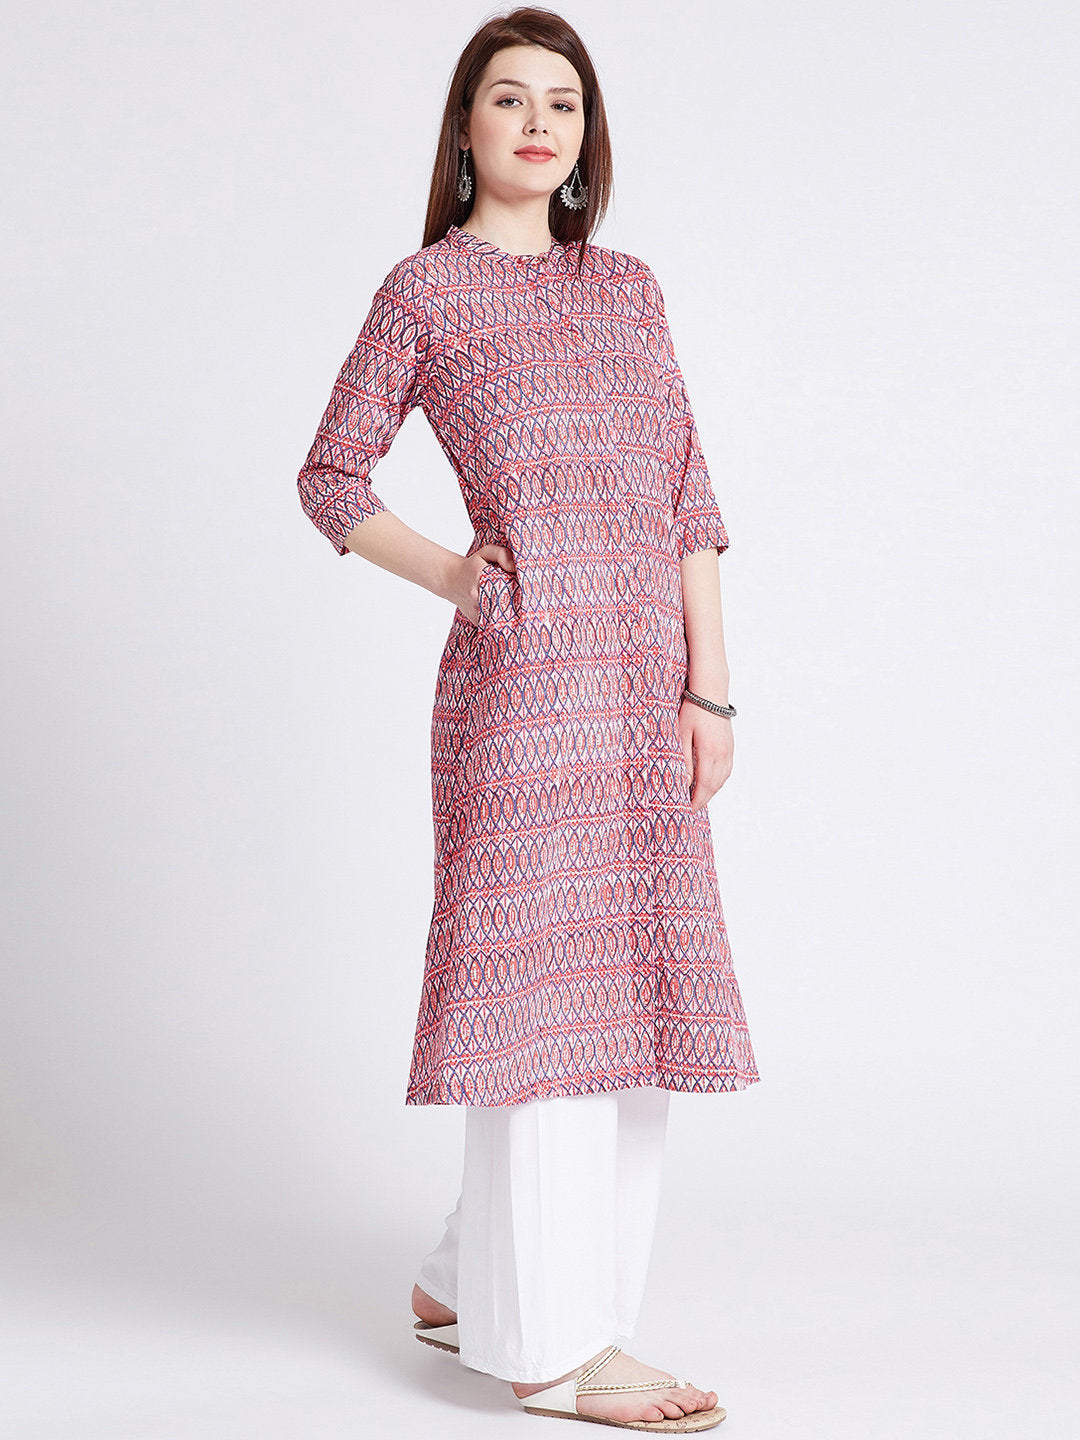 Hand block printed long kurta with front slit in reddish pink colour with pockets with button detailing on front